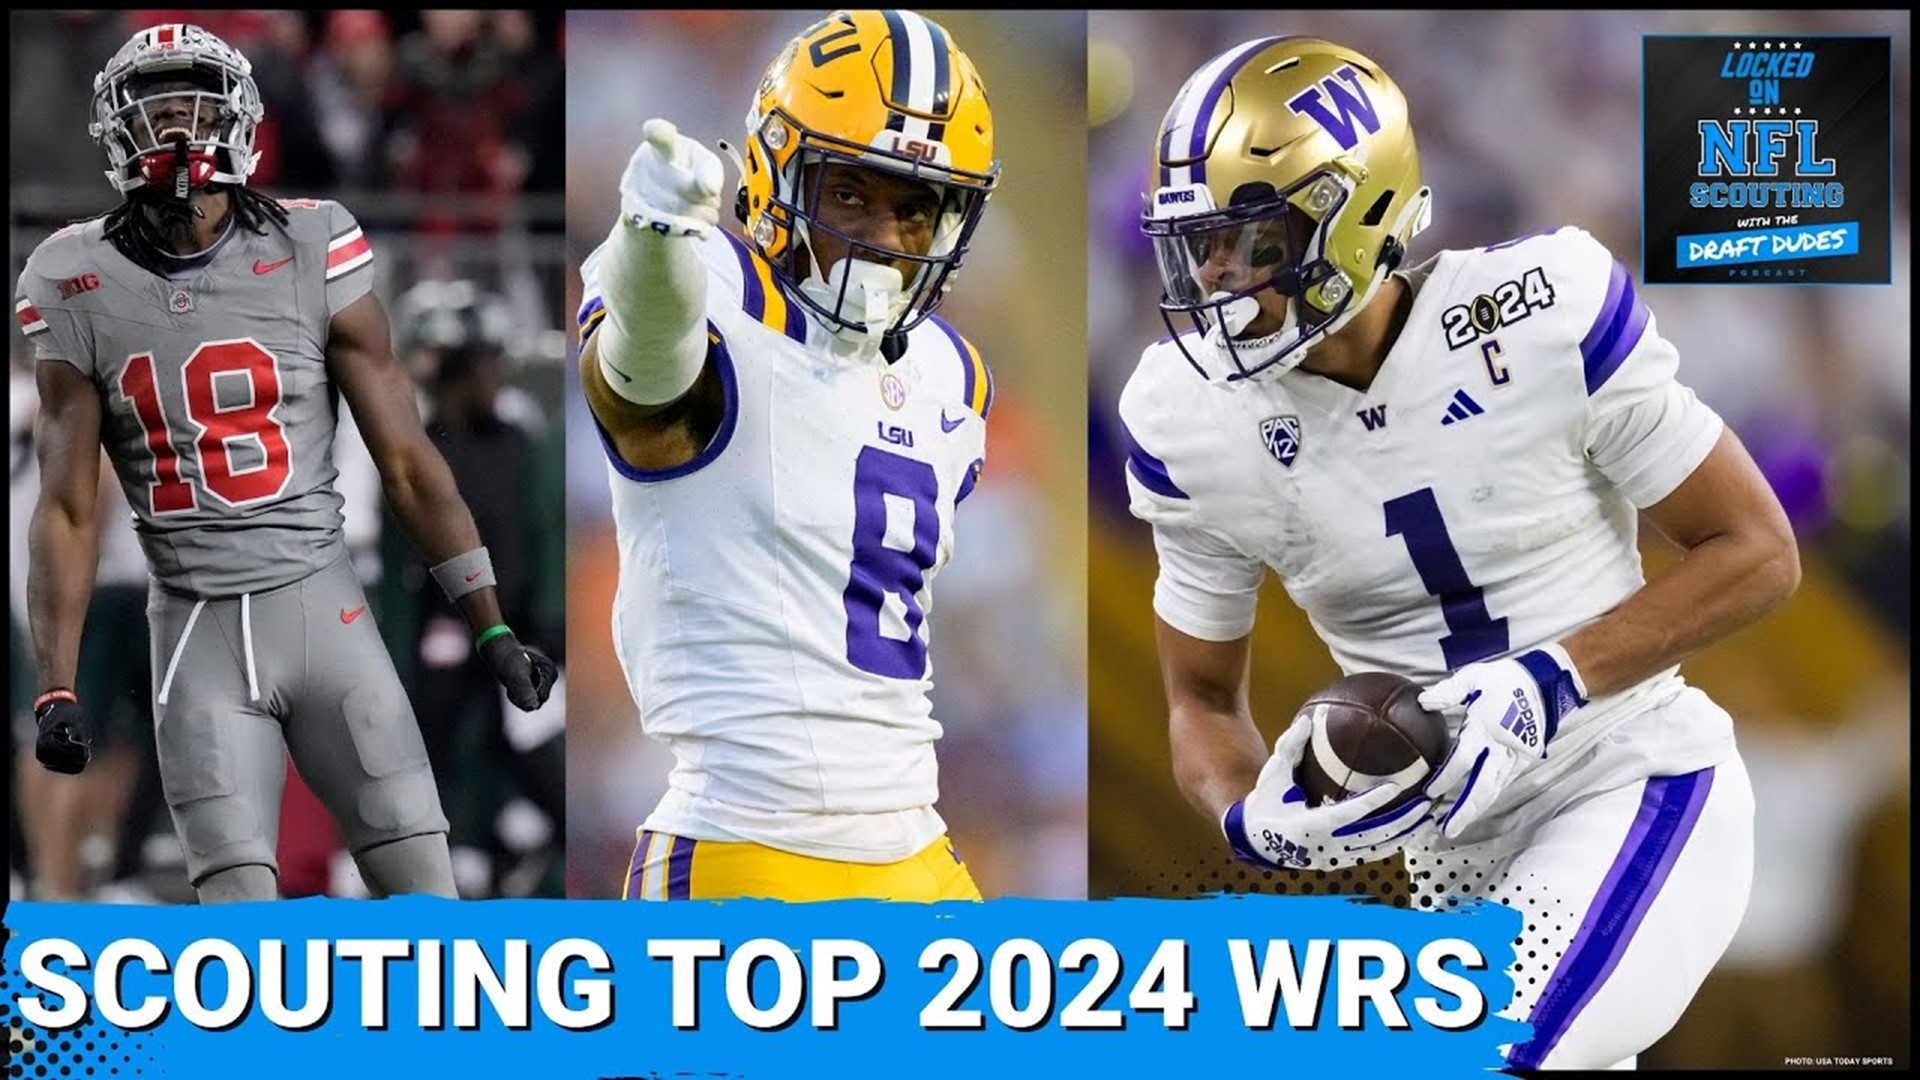 The 2024 NFL Draft is likely to produce 3 wide receivers being selected among the top-10 selections in Marvin Harrison Jr., Malik Nabers & Rome Odunze.